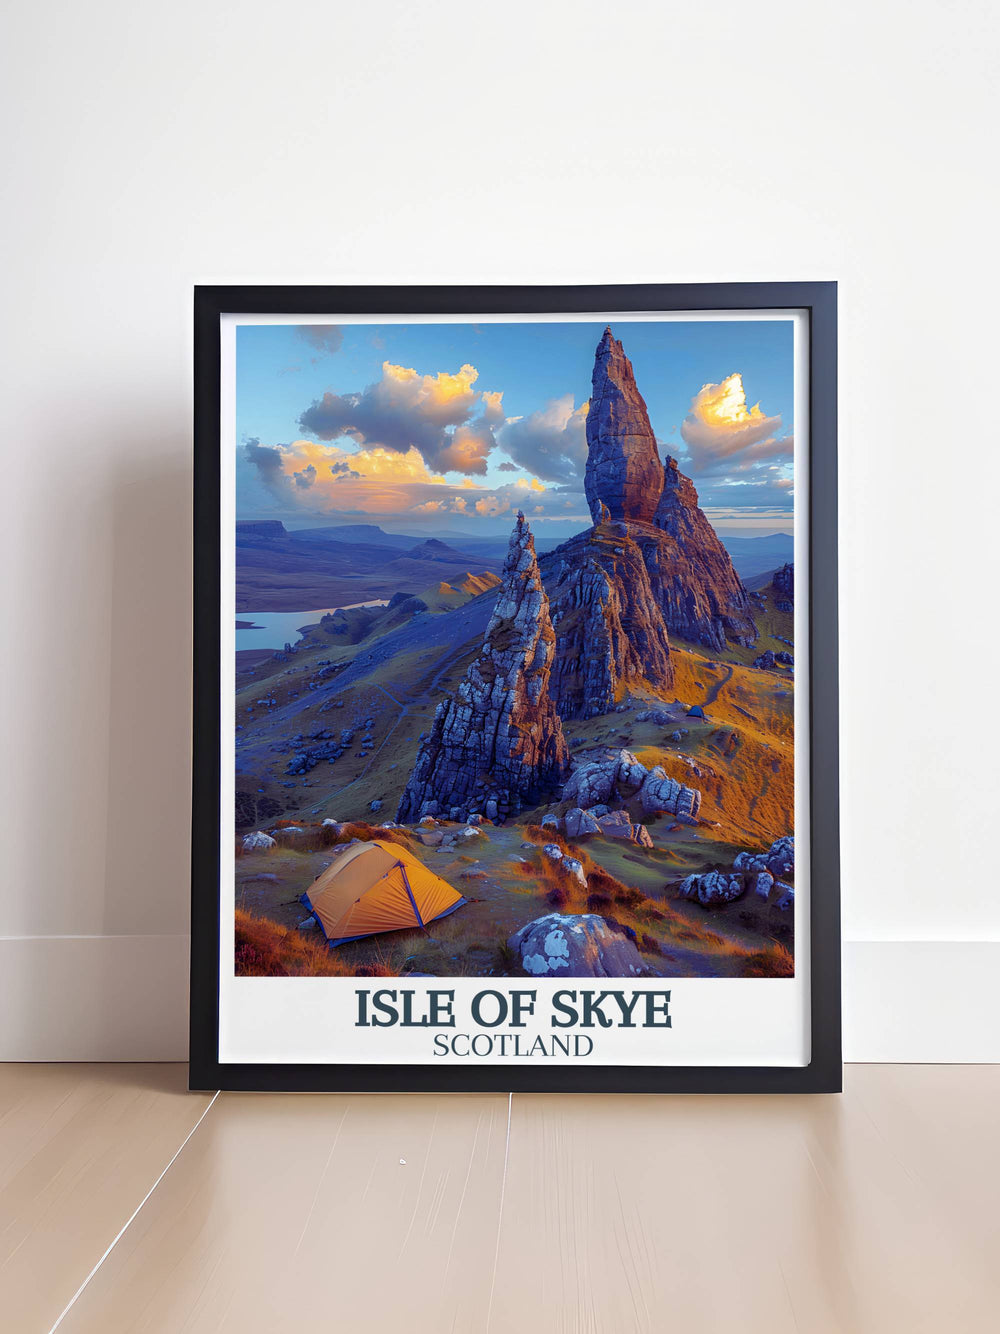 Vintage poster of The Old Man of Storr capturing the timeless beauty of the Isle of Skyes landscapes